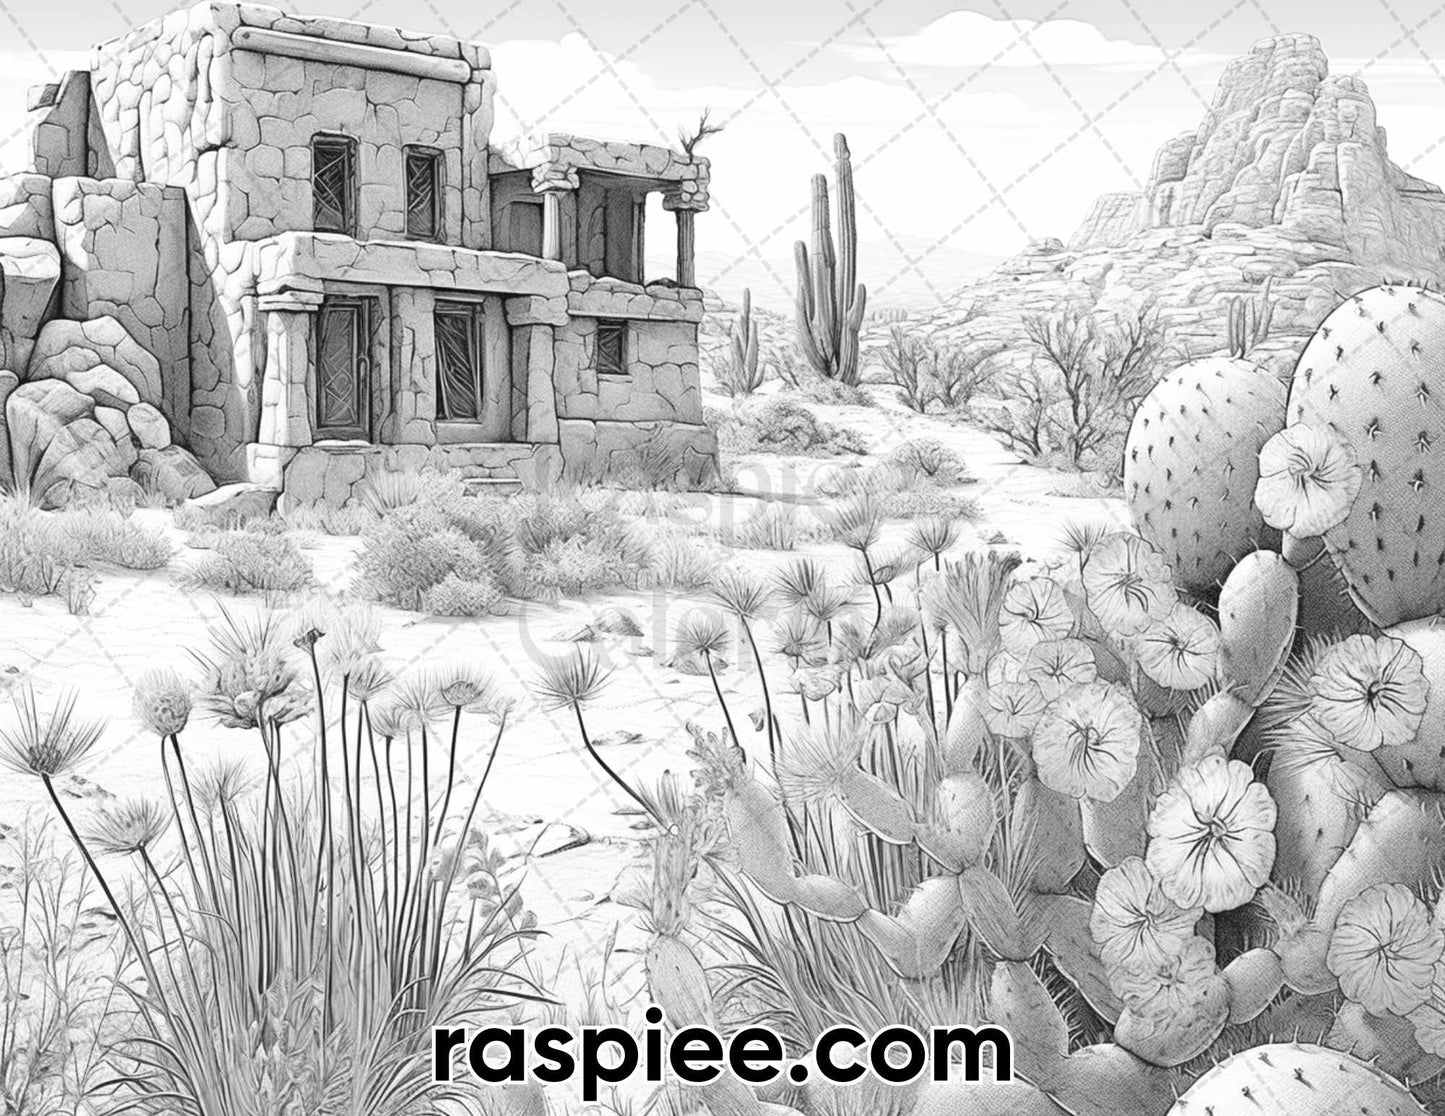 adult coloring pages, adult coloring sheets, adult coloring book pdf, adult coloring book printable, grayscale coloring pages, grayscale coloring books, flower coloring pages for adults, flower coloring book pdf, spring coloring pages for adults, spring coloring book pdf, landscapes coloring pages for adults, desert coloring pages